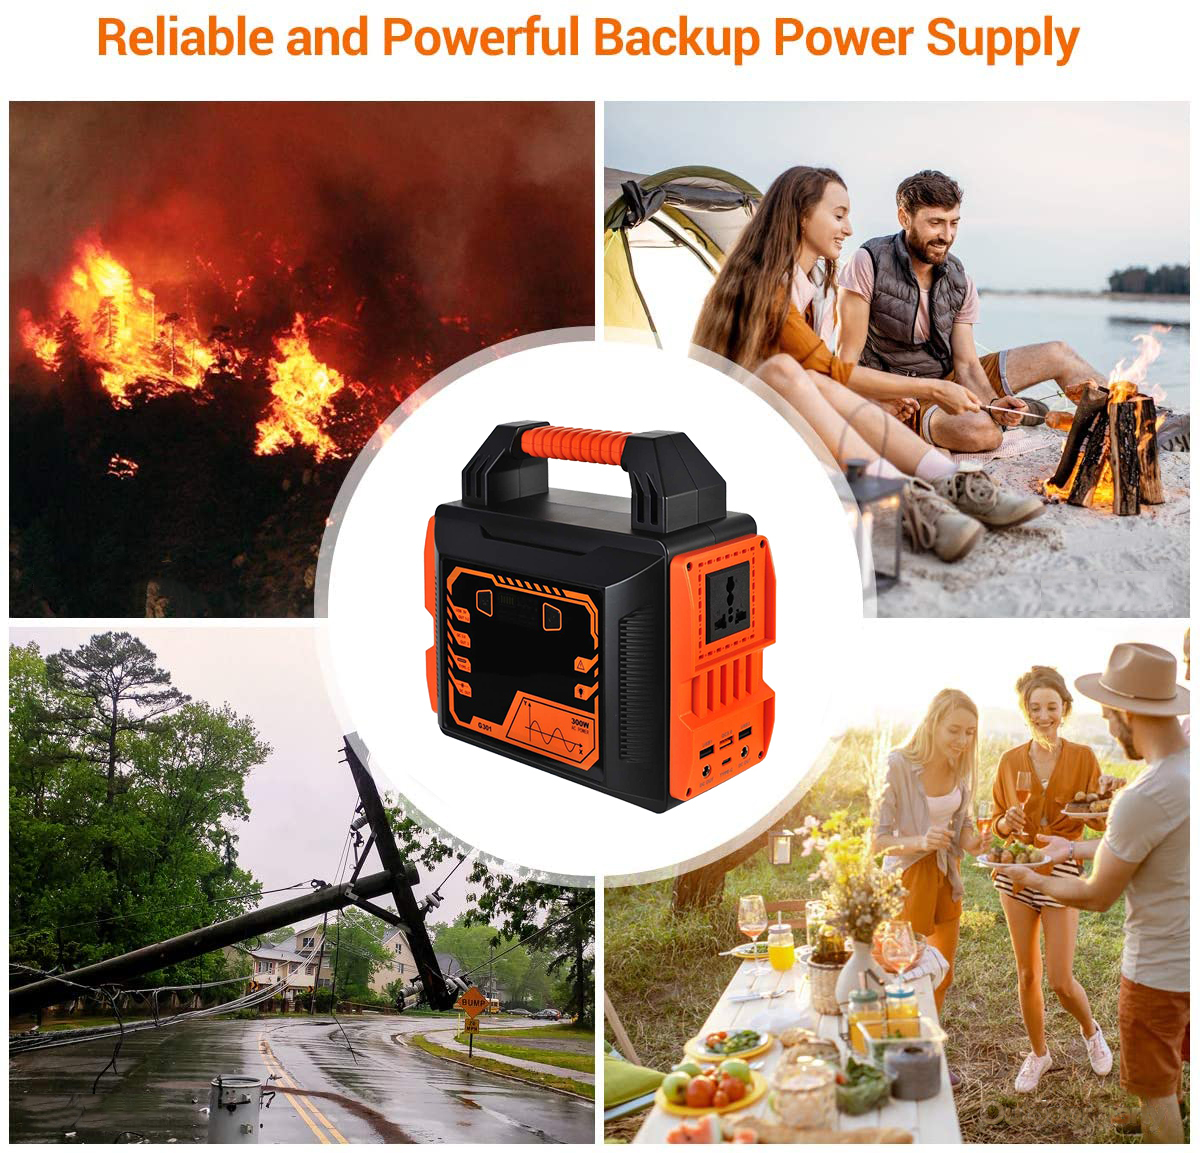  portable power supply high capacity . battery portable power supply 500W original sinusoidal wave generator disaster prevention supplies disaster prevention goods sleeping area in the vehicle camp outdoor generator . electro- measures 